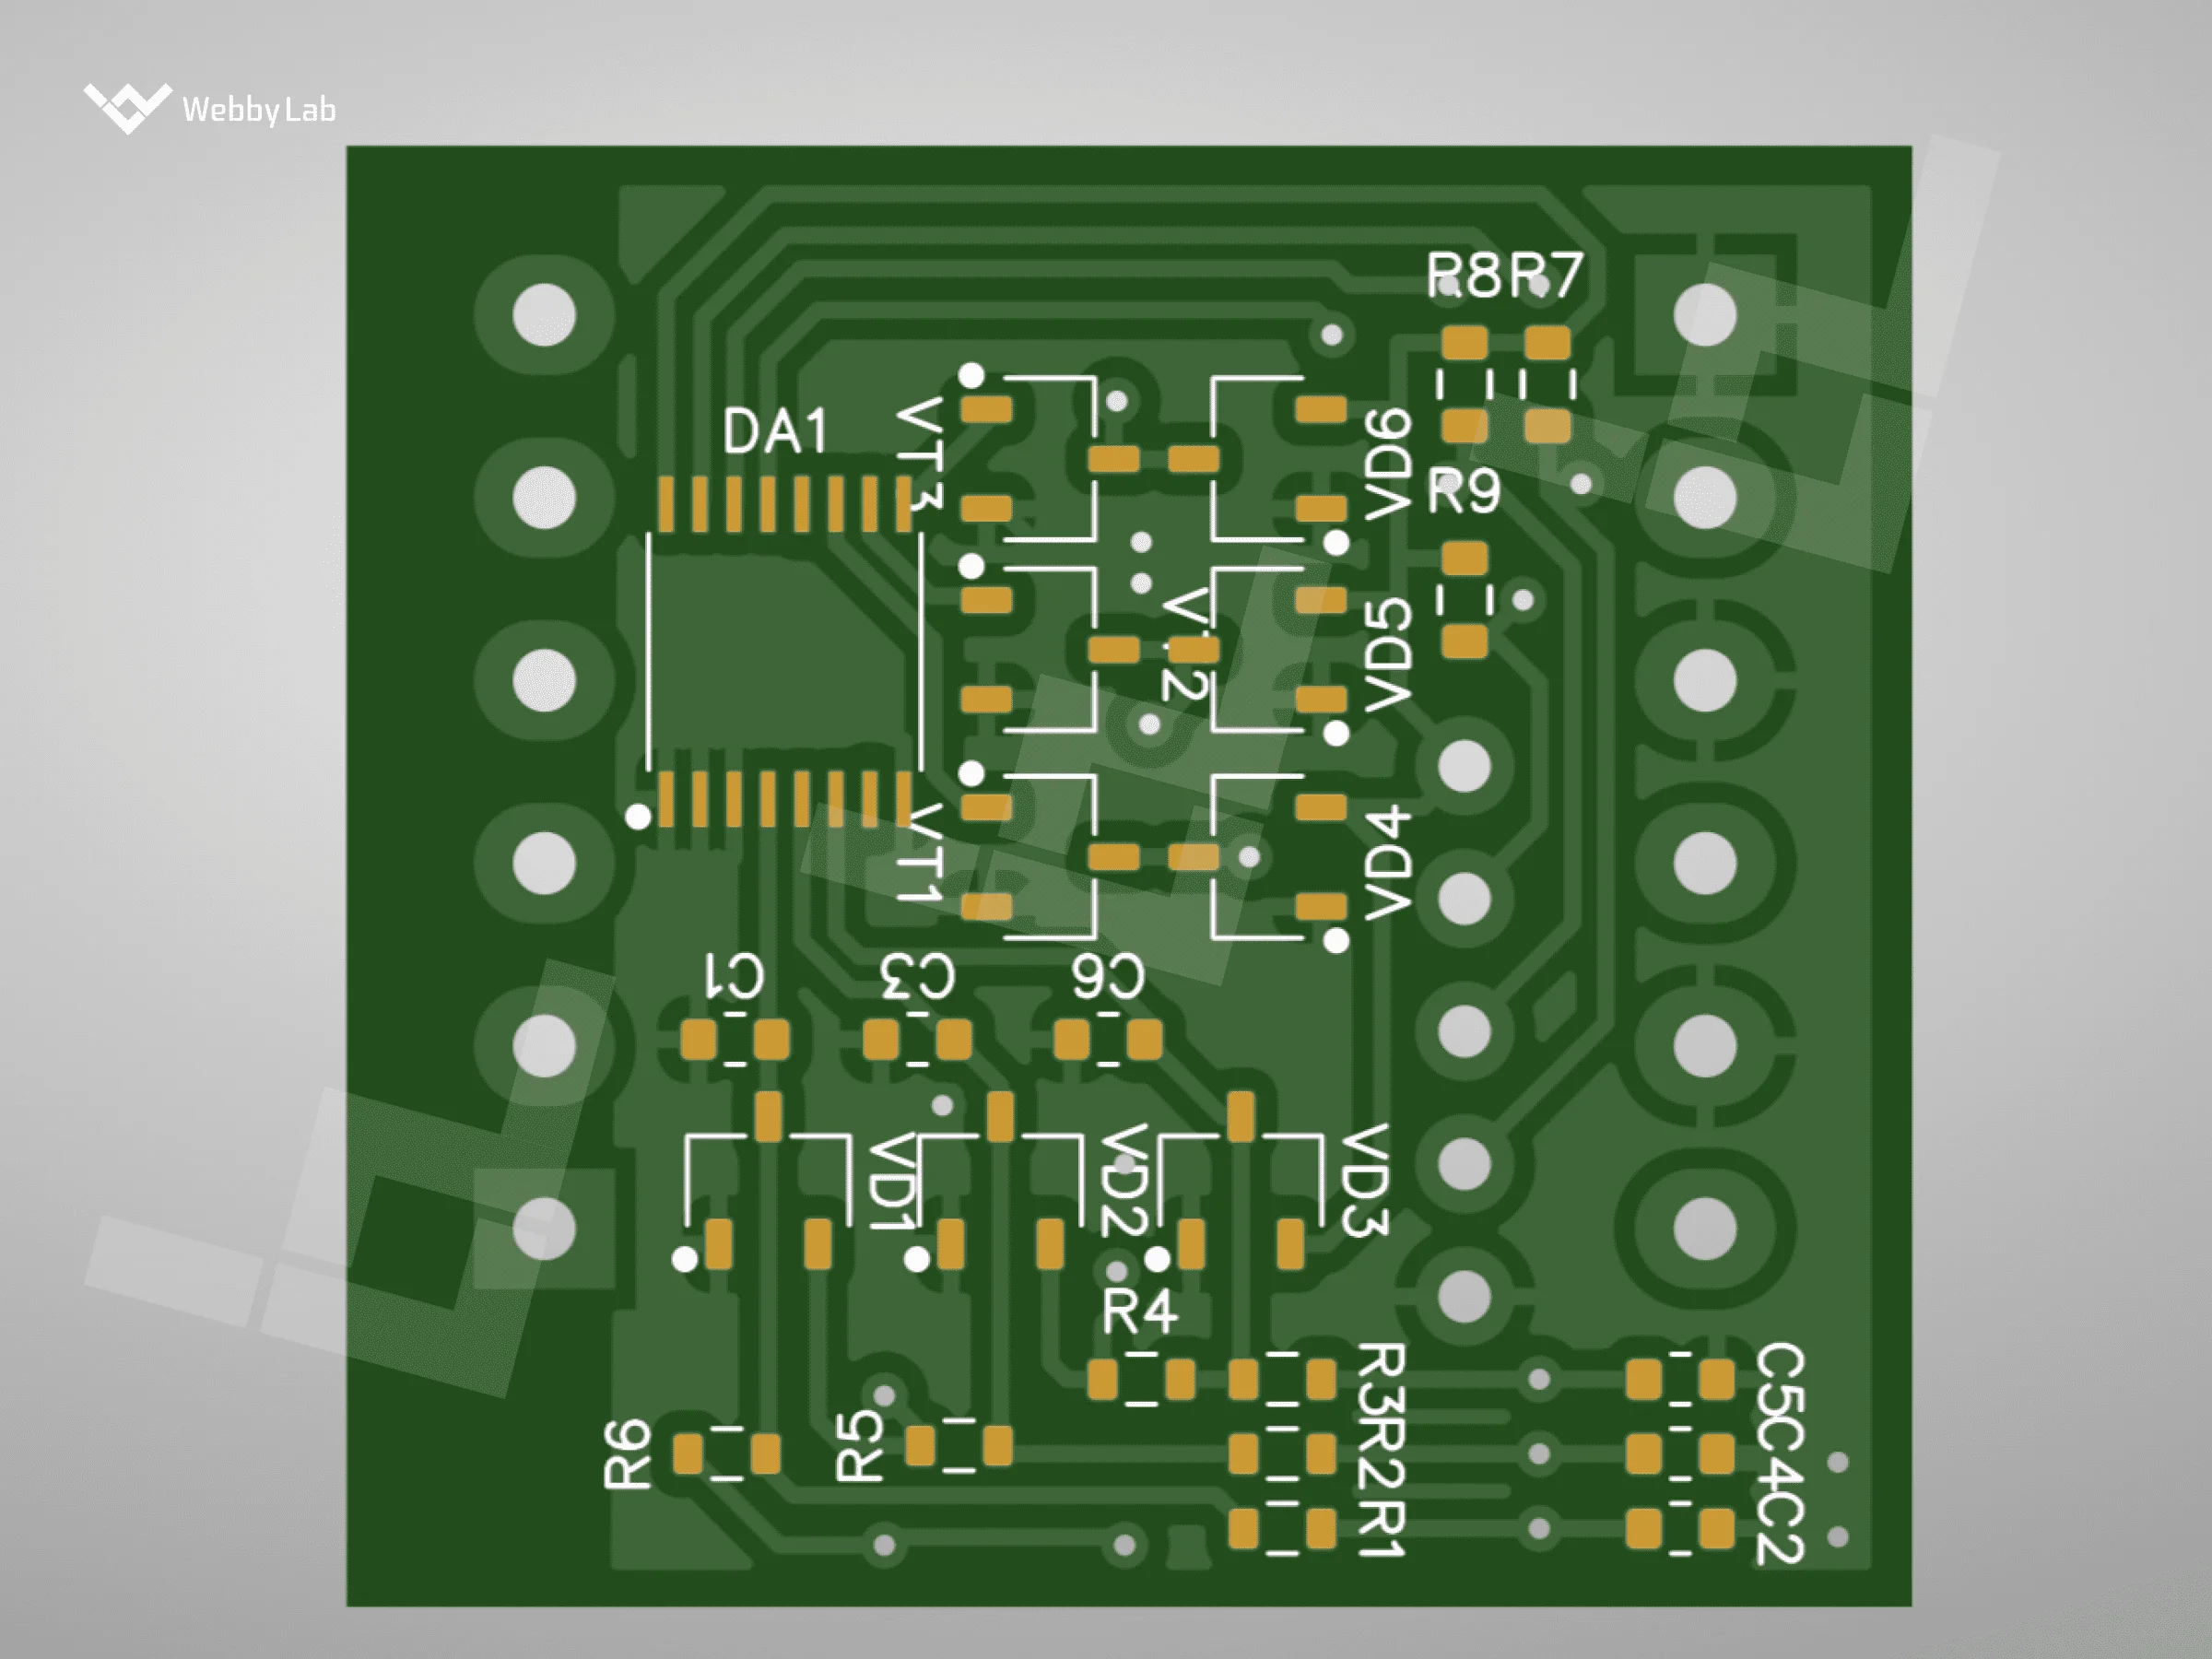 An example of a Gerber file of one version of the Propuskator controller - Made by Webbylab